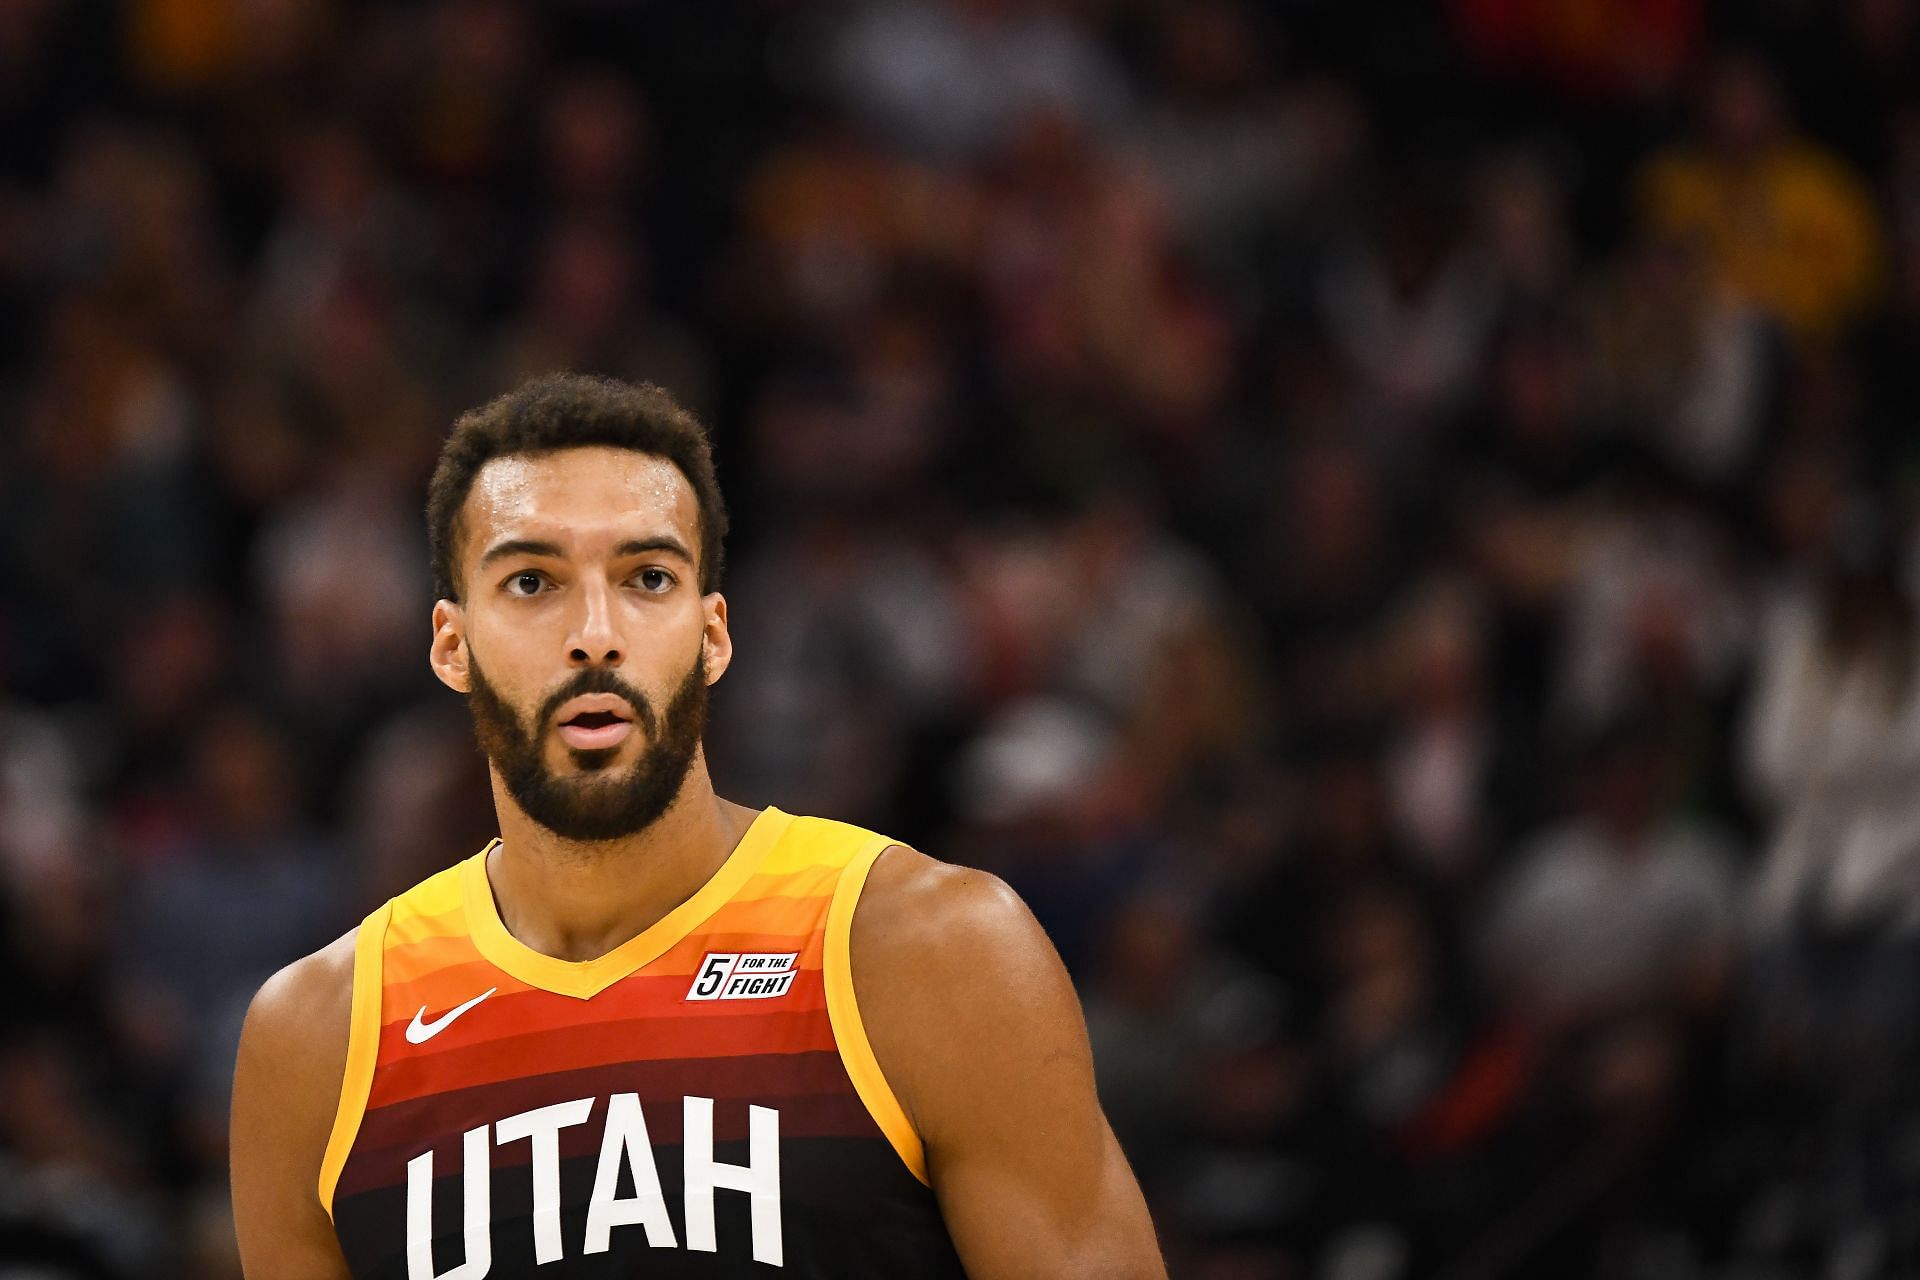 Shannon Sharpe believes Rudy Gobert would struggle with O&#039;neal because he struggled with Ben Simmons.